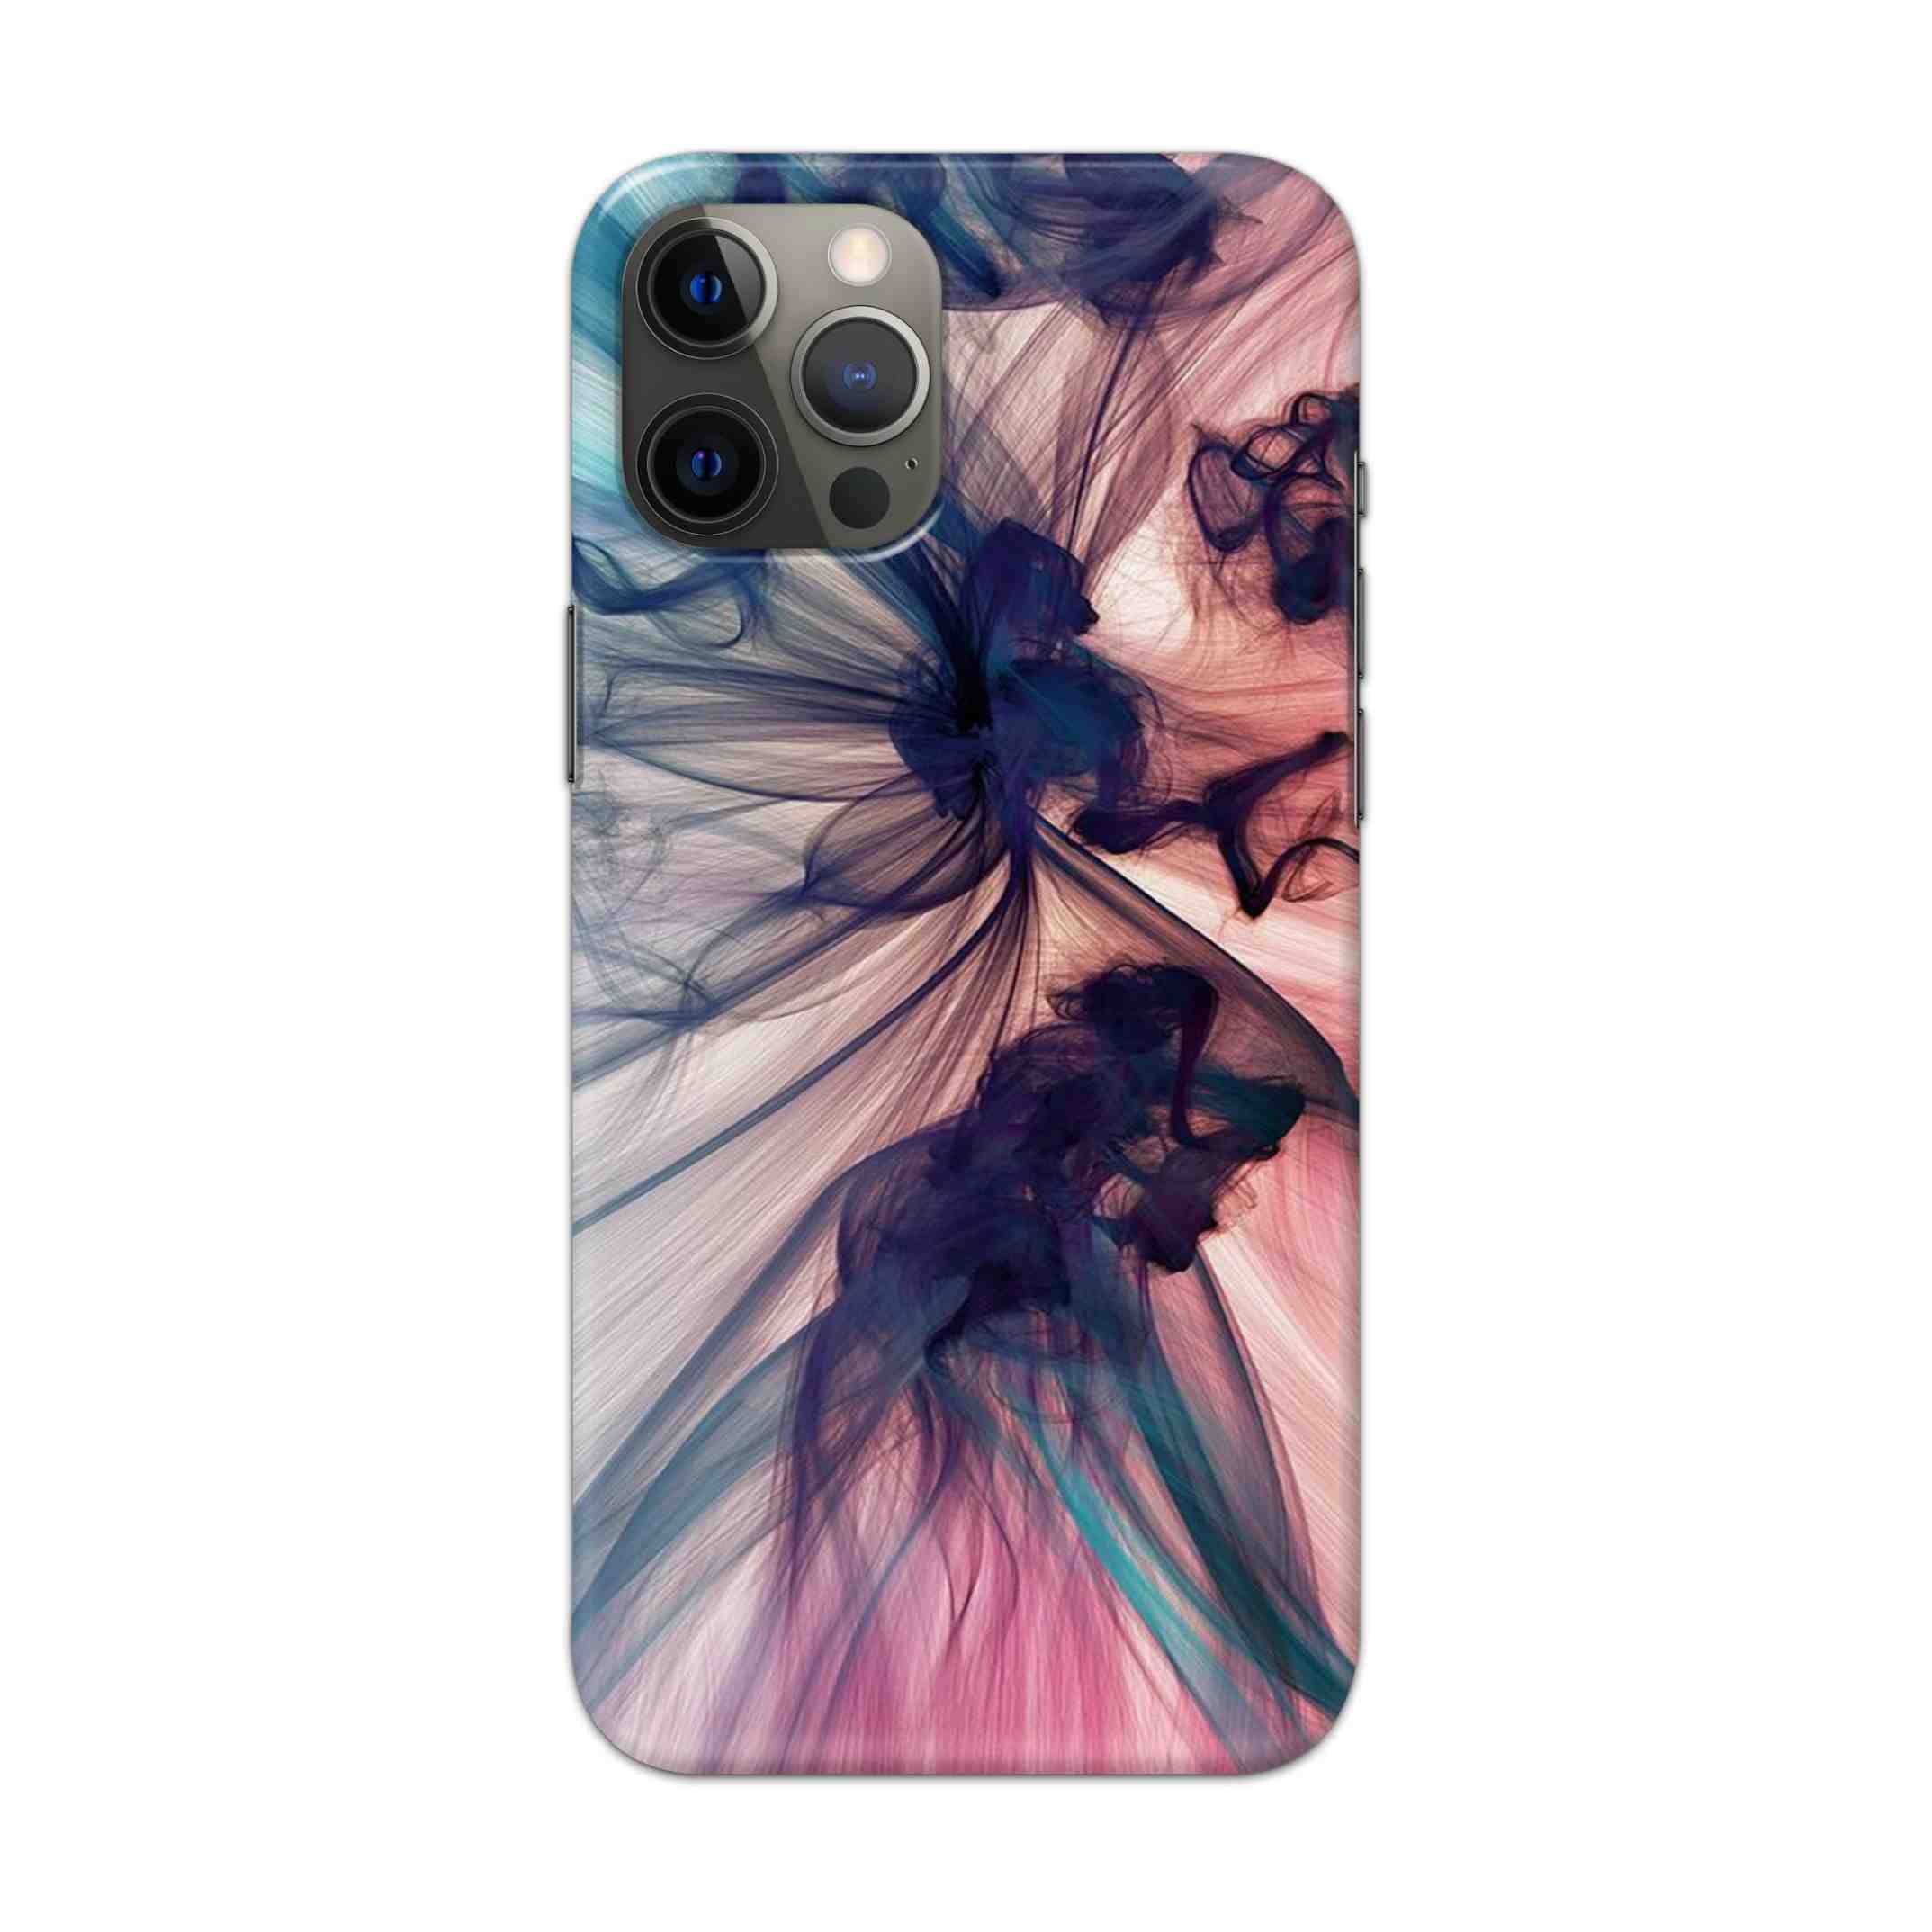 Buy Colourful Texture Hard Back Mobile Phone Case Cover For Apple iPhone 12 pro max Online